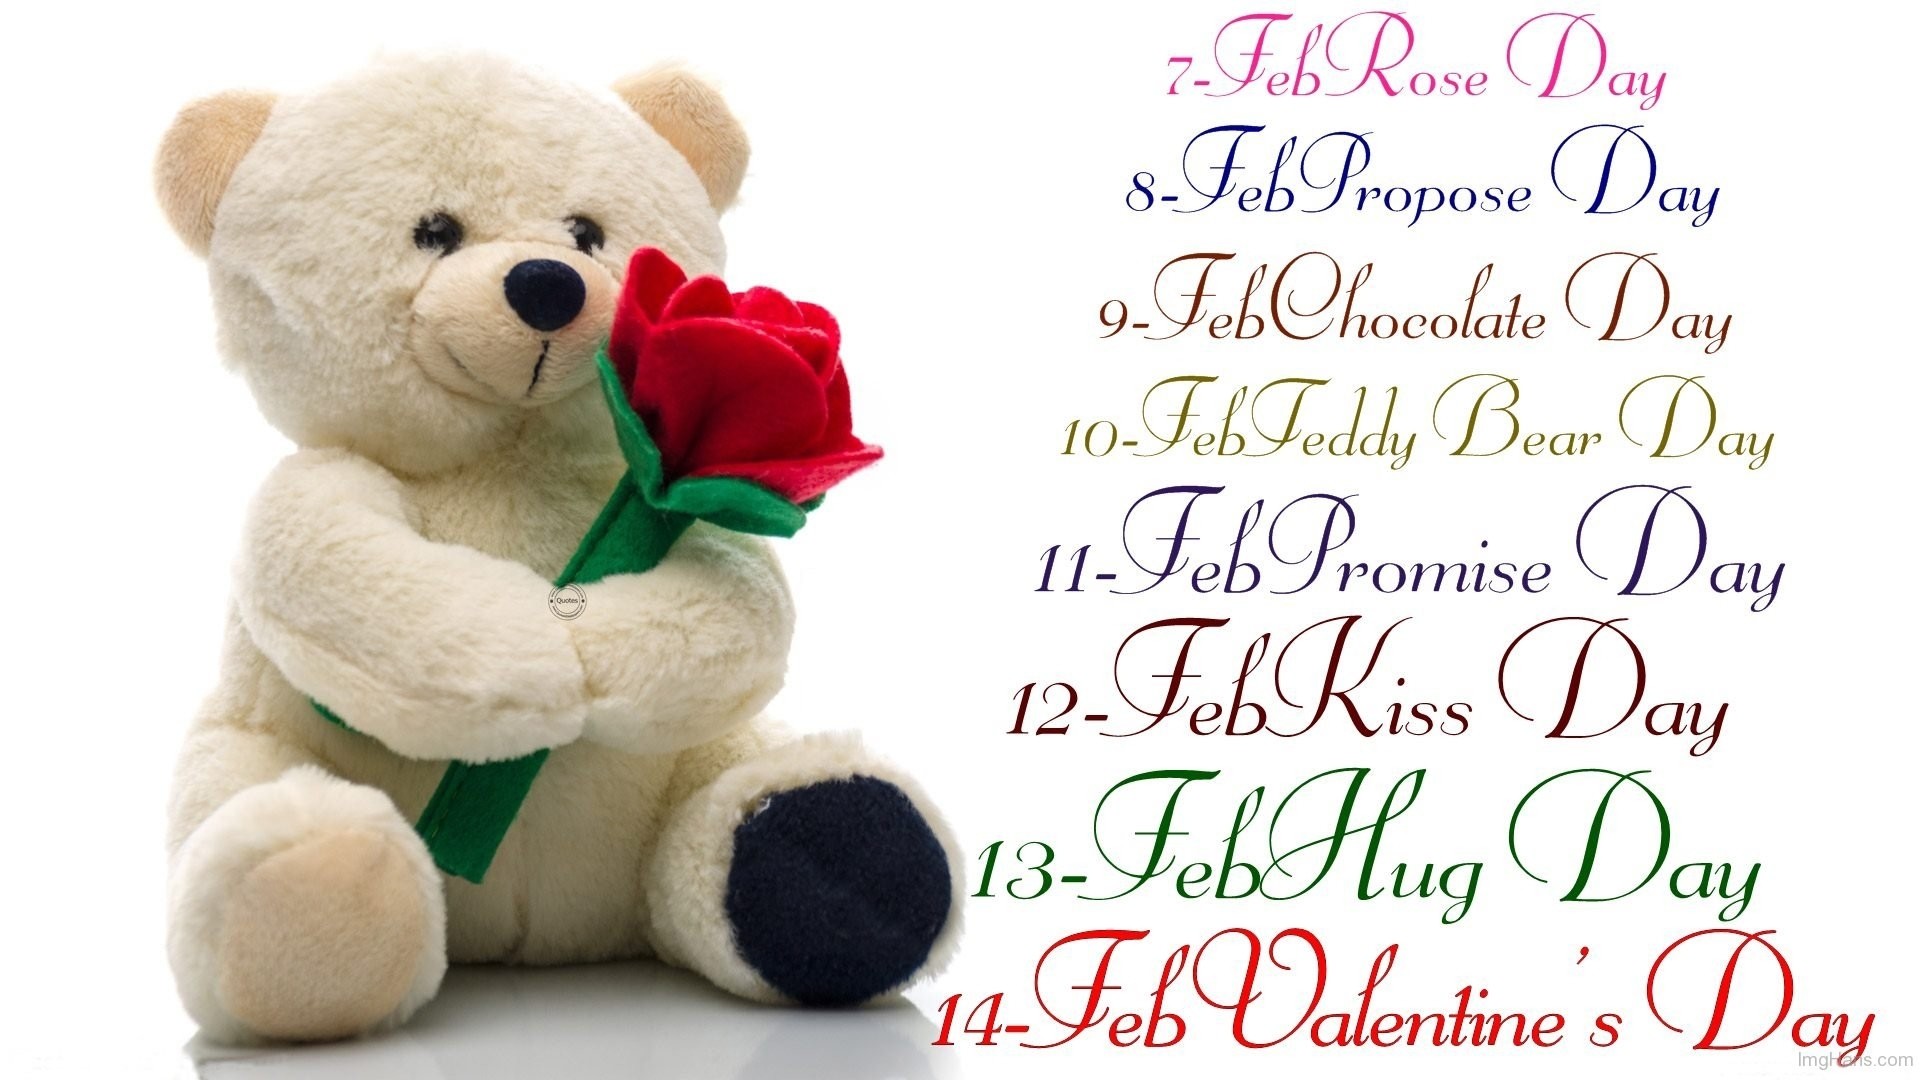 Cute Teddy Bear Images With Quotes Teddy Day Pictures Images Page 4 1920x1080